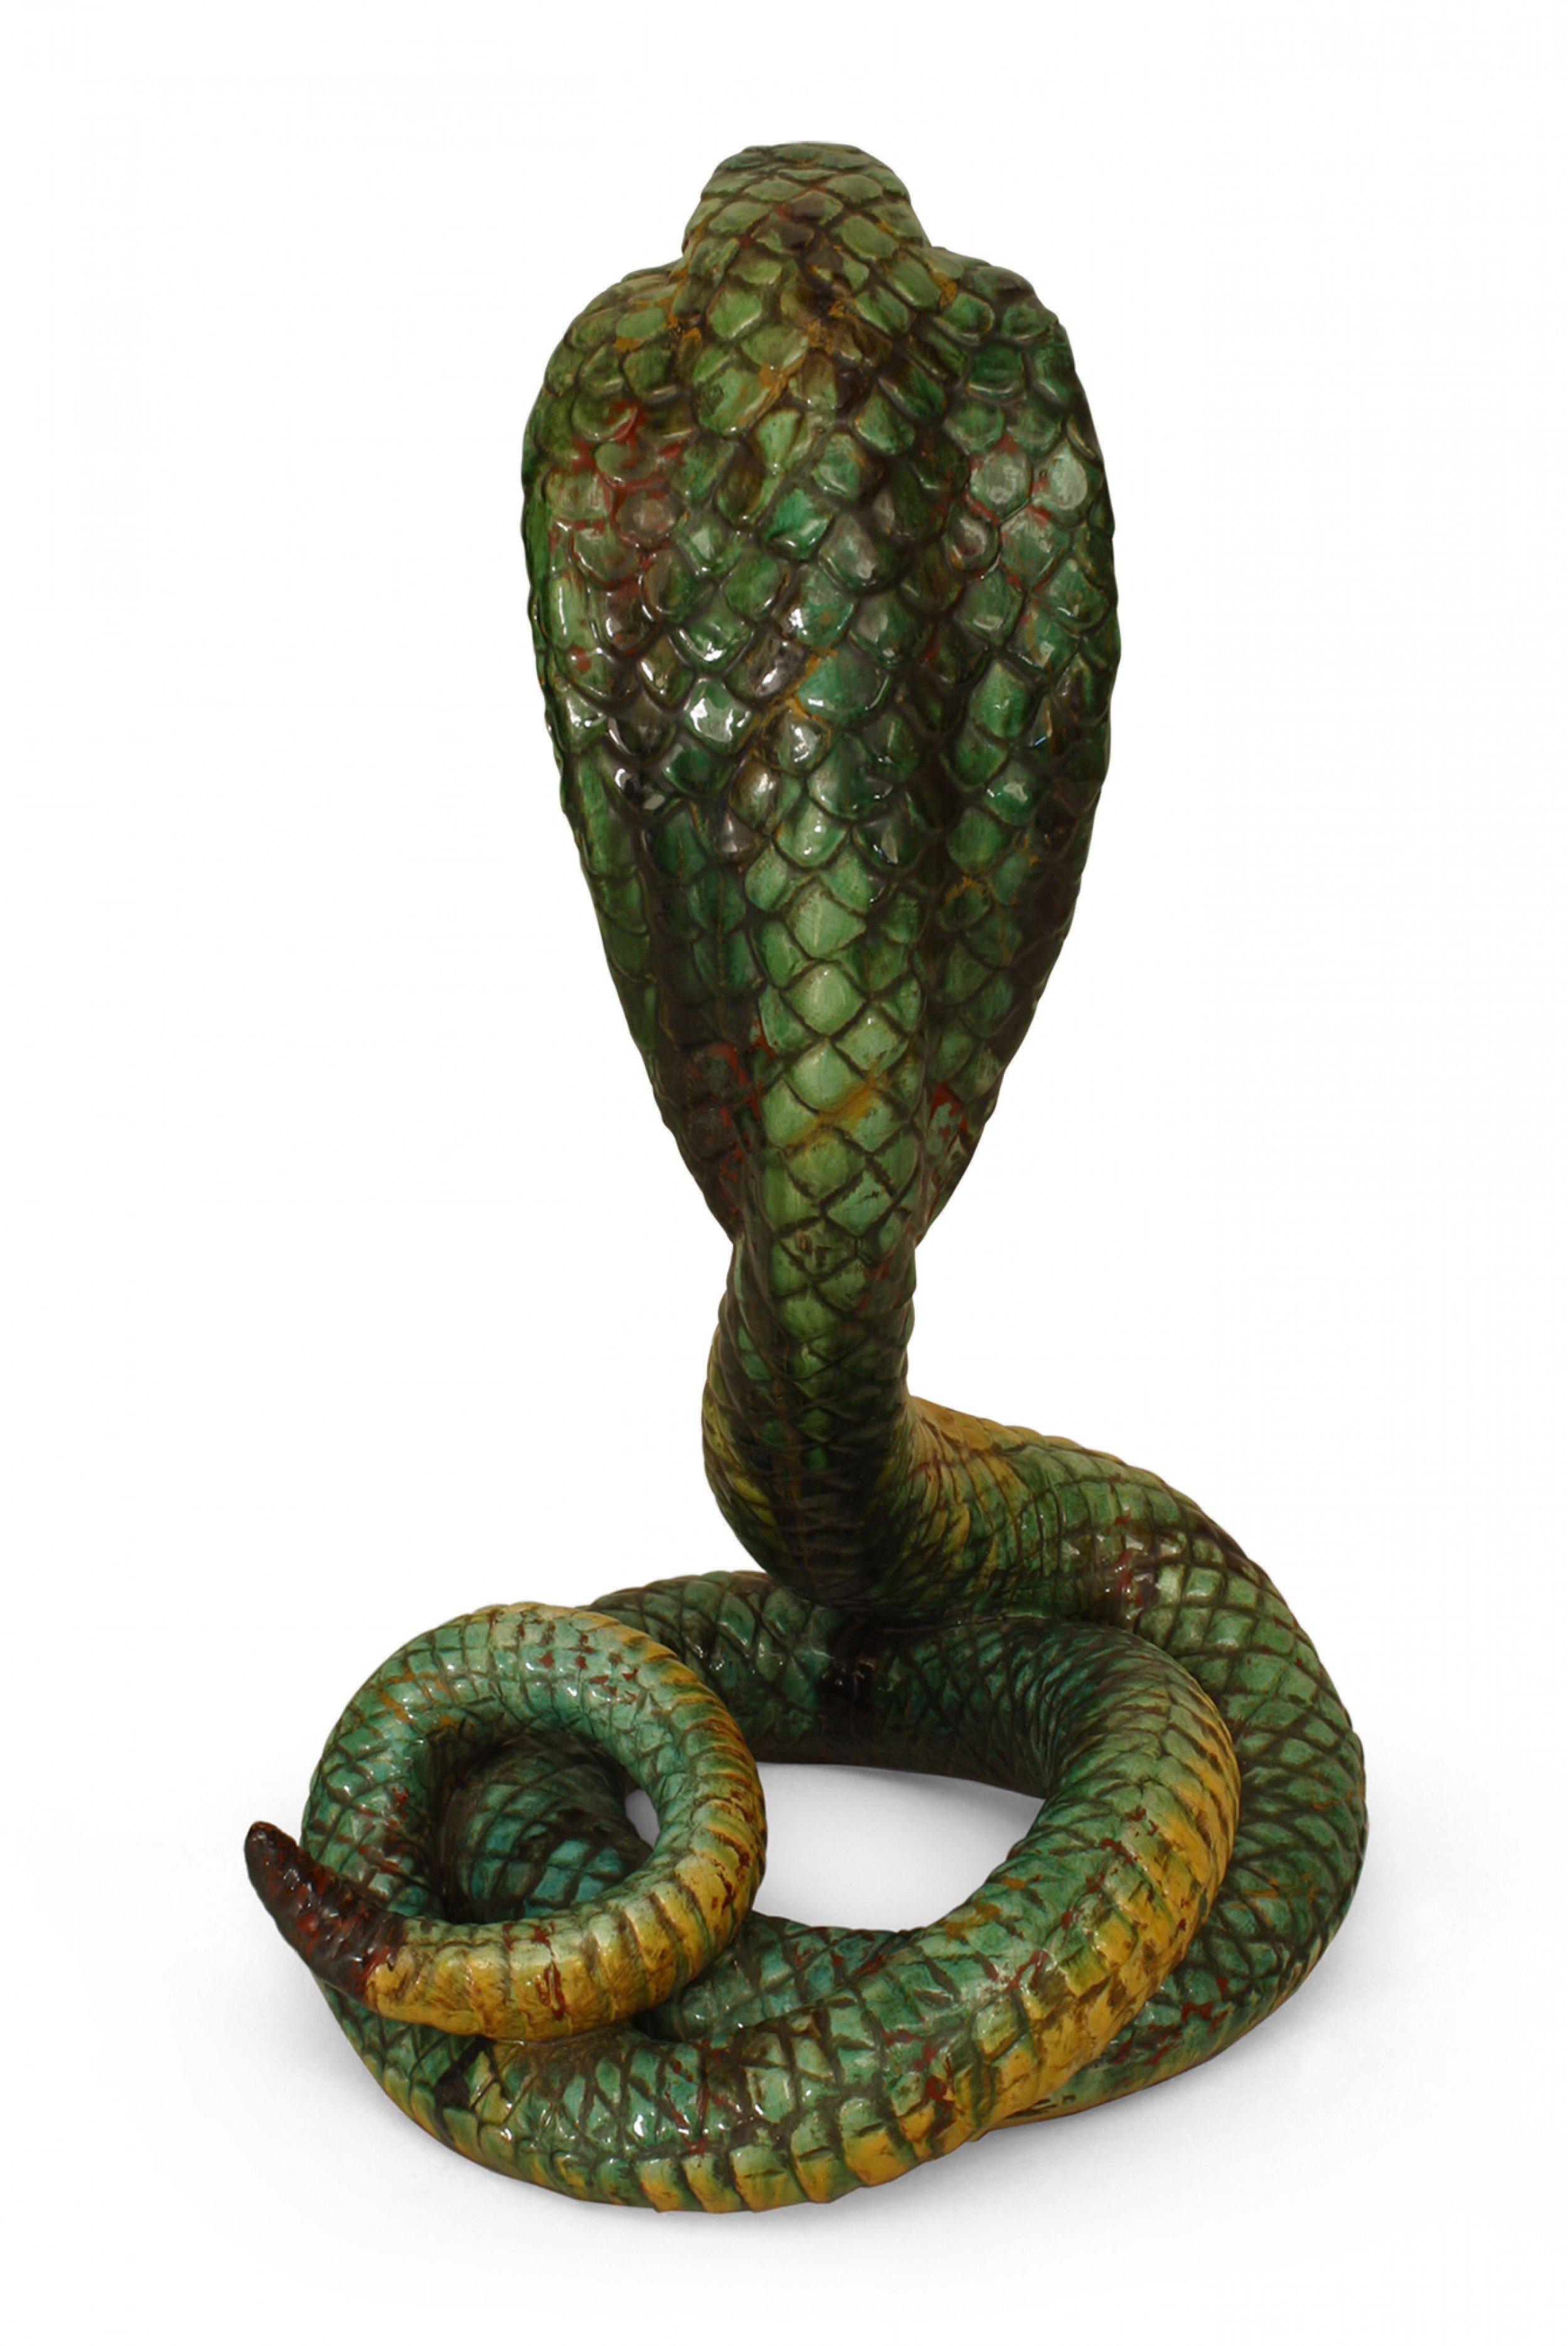 Middle Eastern Moorish style (Italian 19/20th cent) Majolica porcelain life sized green and yellow cobra, coiled with a raised head.
      